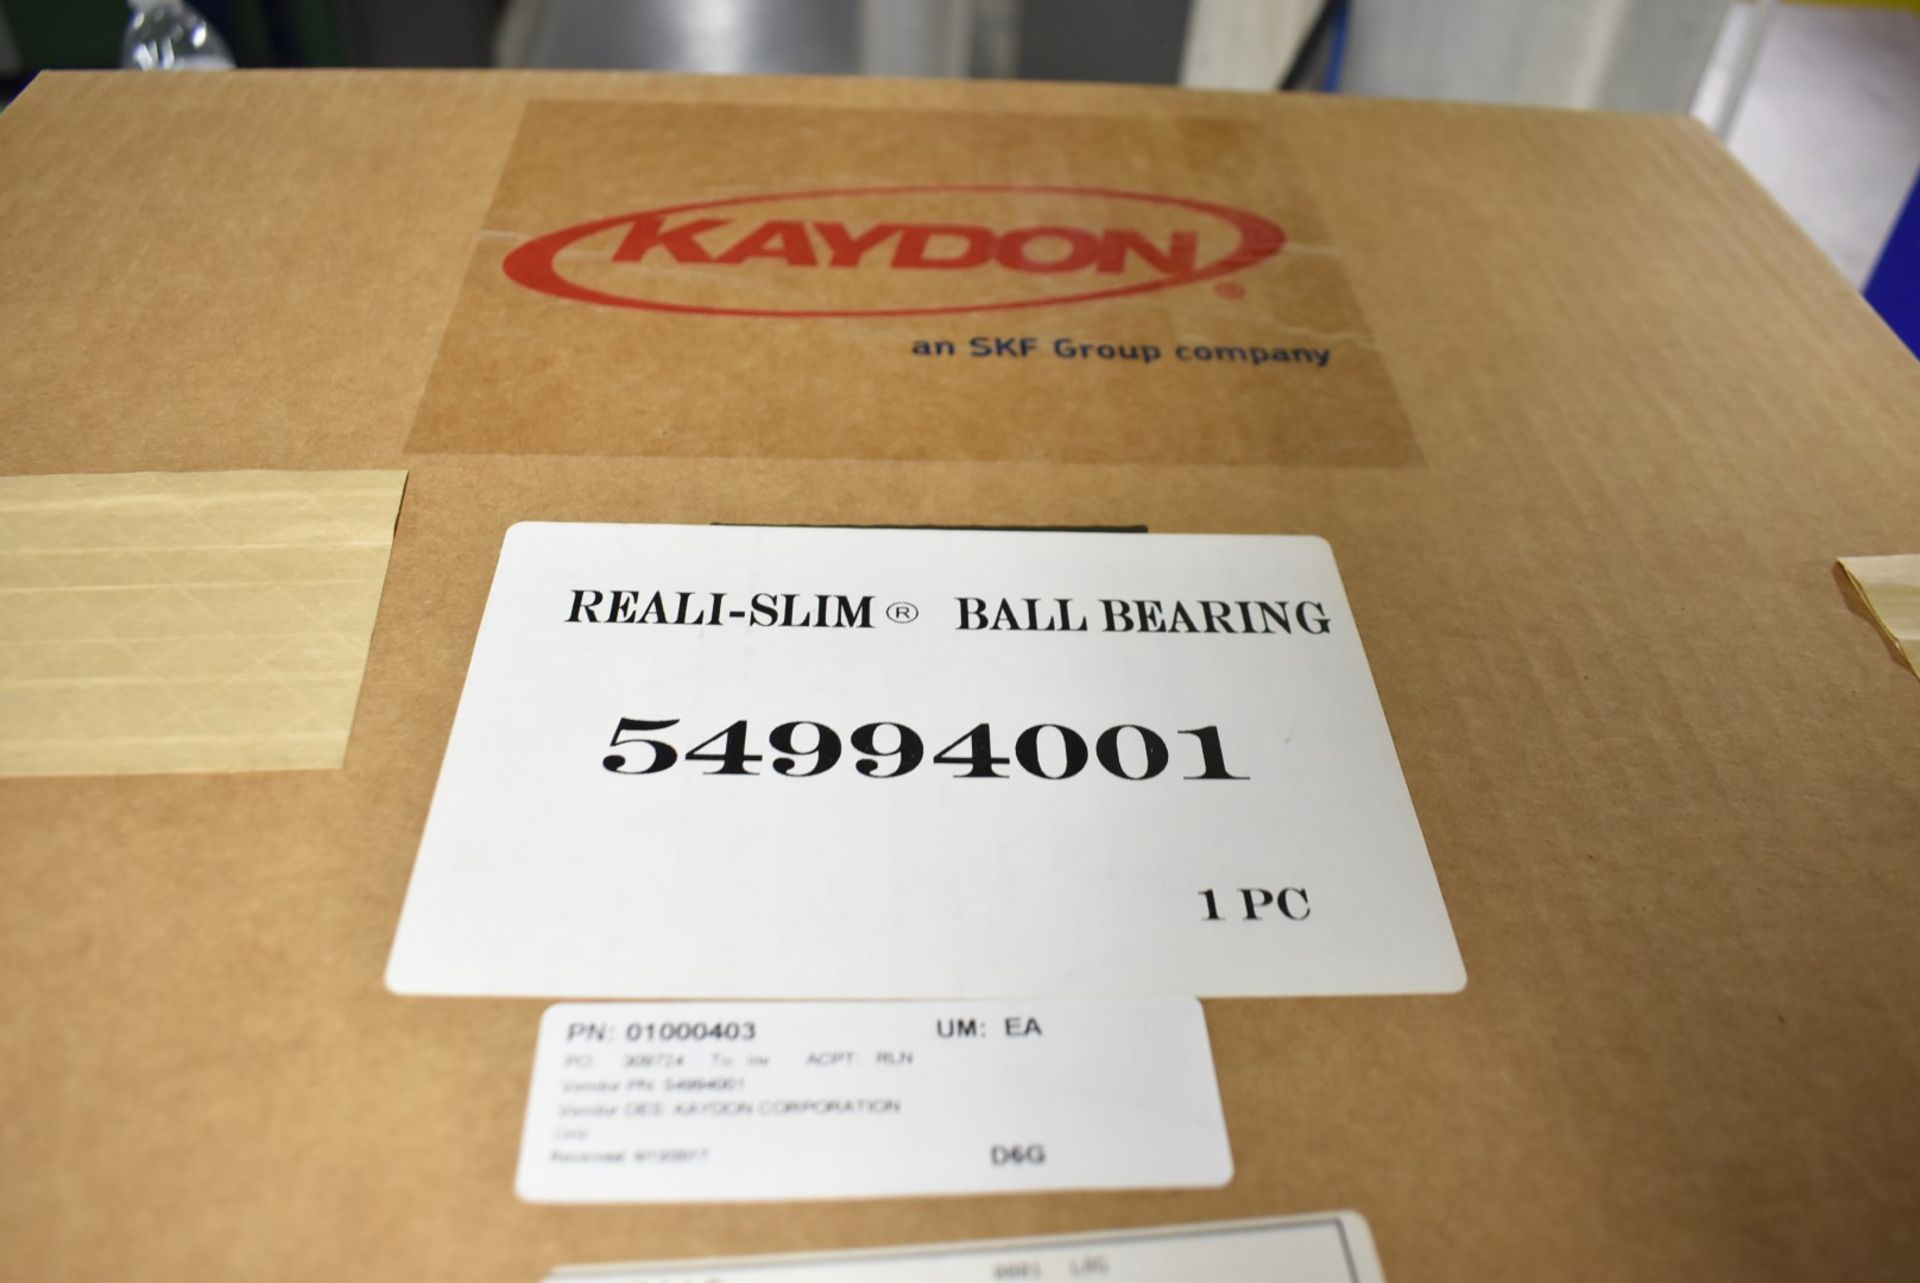 LOT/ KAYDON REAL-SLIM 54994001 BALL BEARINGS [RIGGING FEES FOR LOT #2664 - $50 USD PLUS APPLICABLE - Image 3 of 3